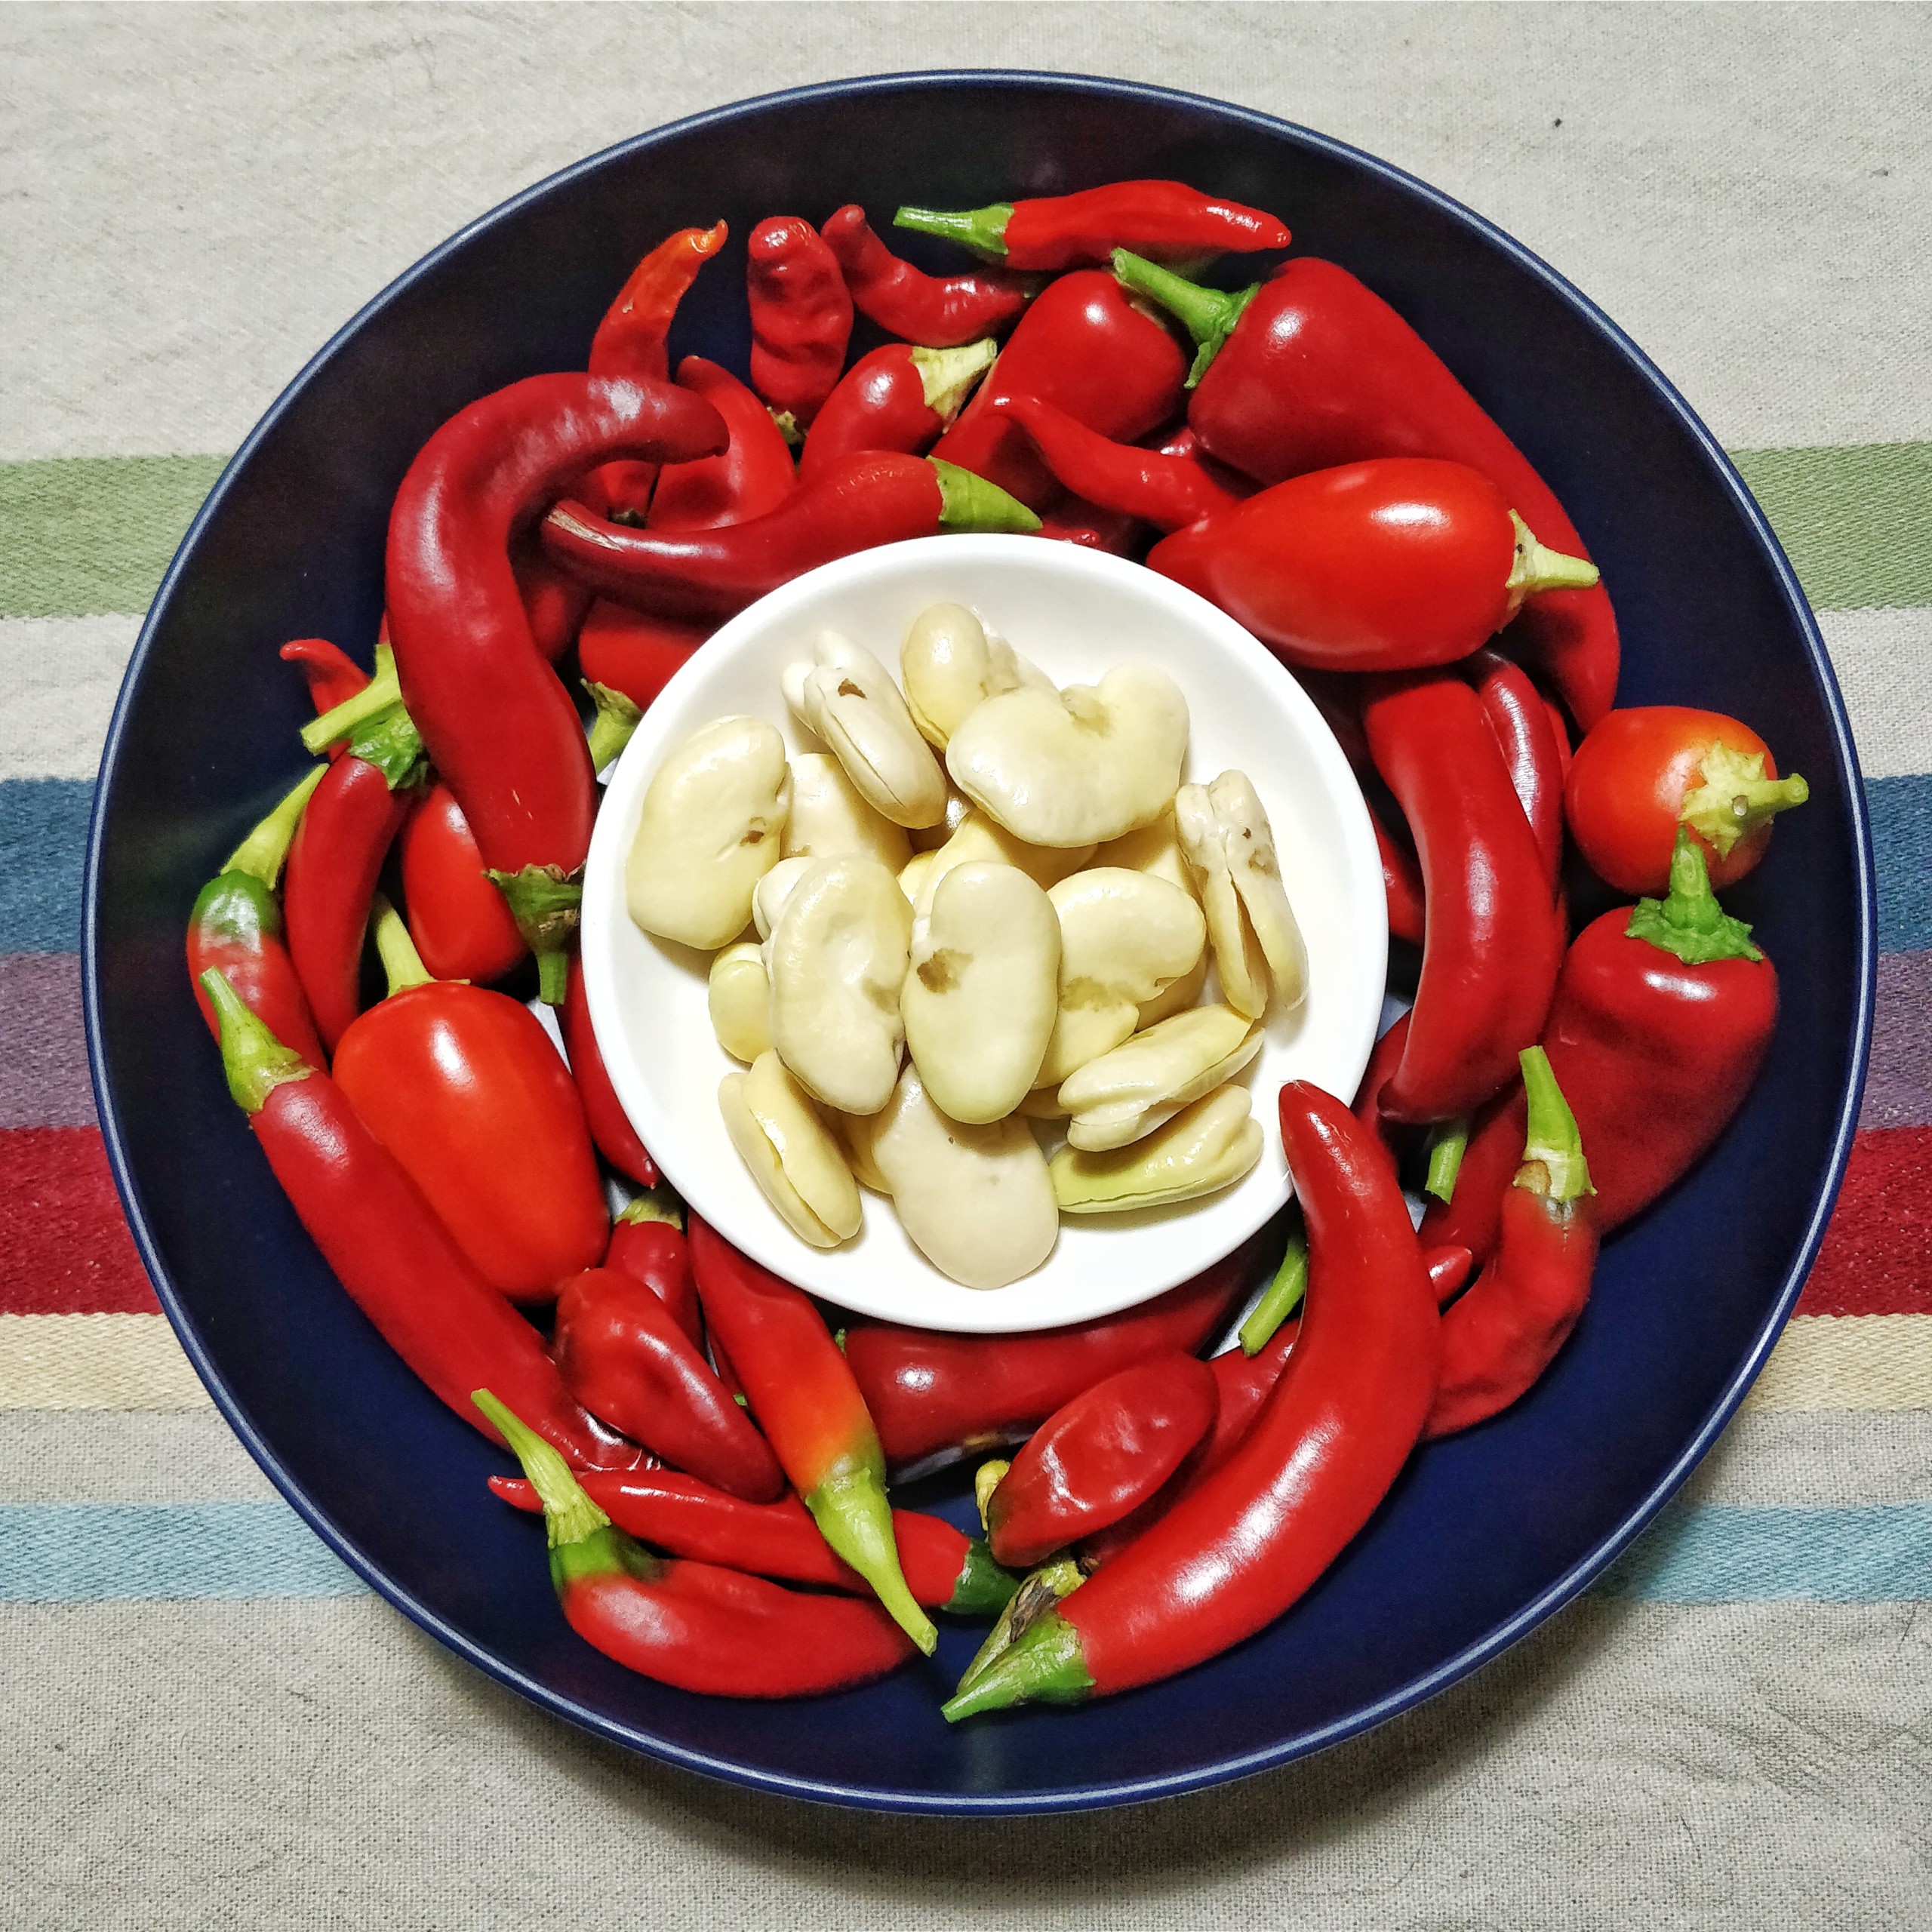 Bowl of chilies with a smaller bowl of fava beans nestled inside.